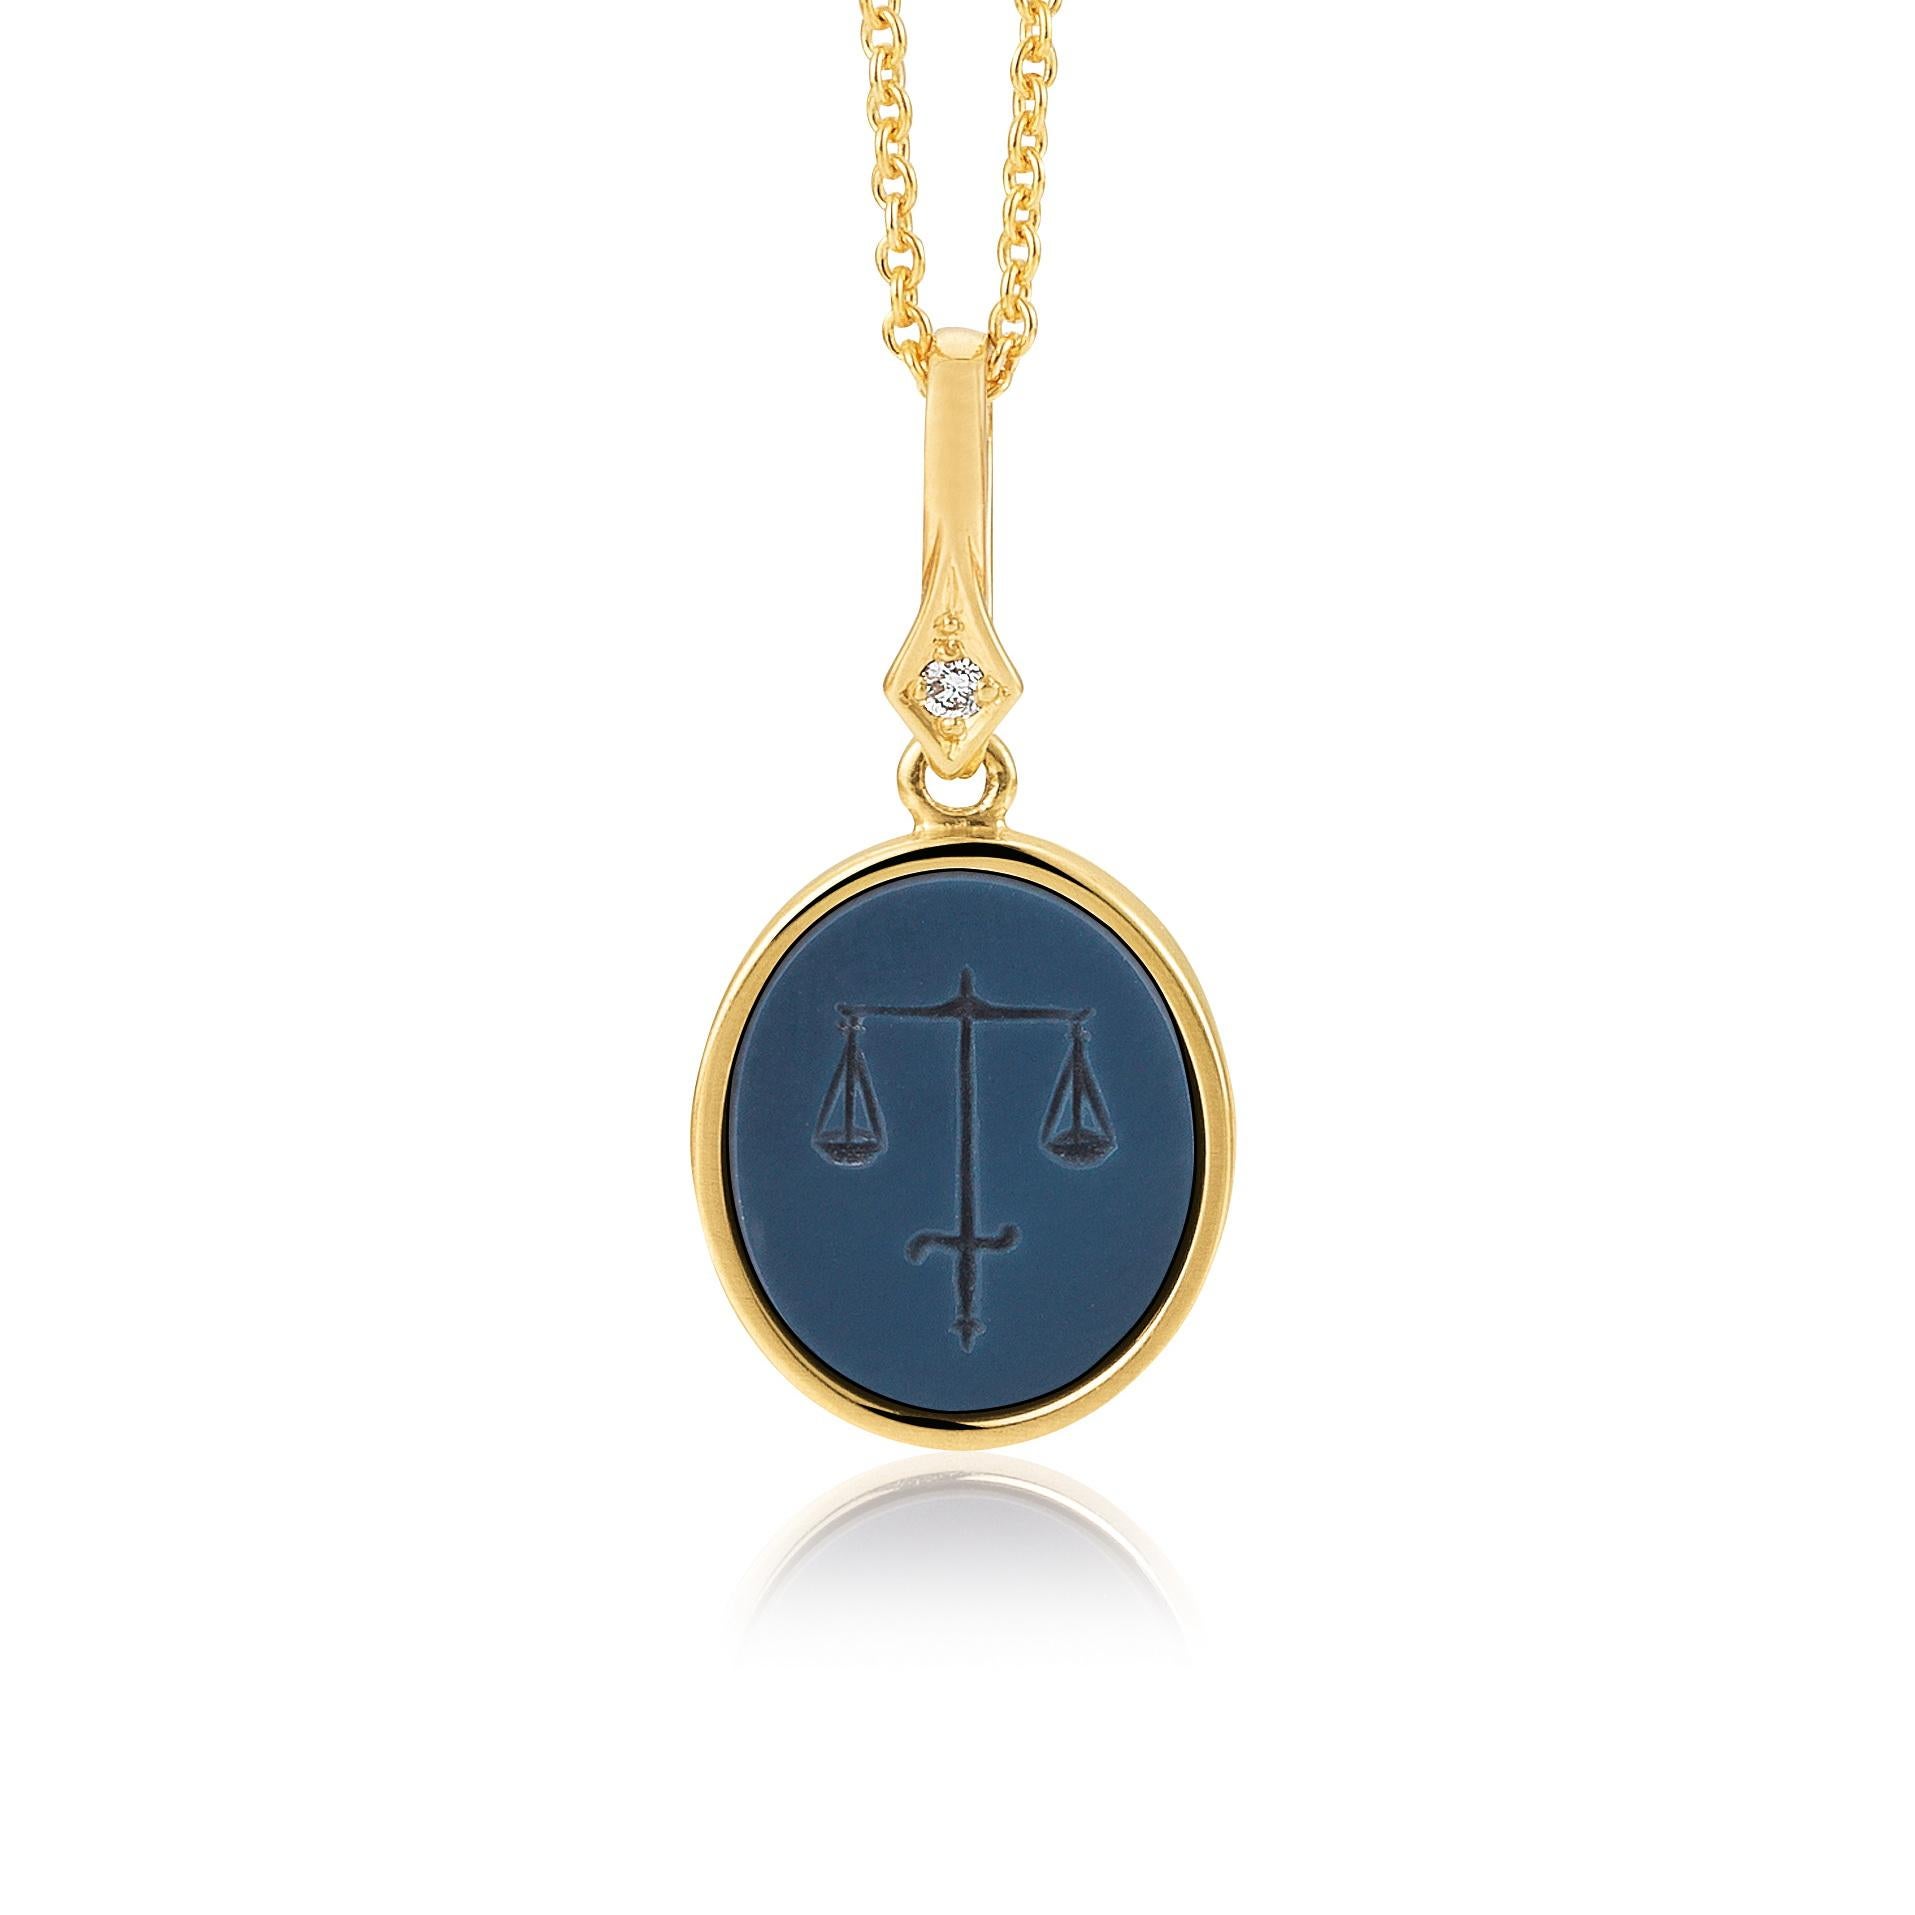 Contemporary Oval Pendant 18k yellow gold Diamond 0.02 ct Blue Layered Onyx Hand Engraved